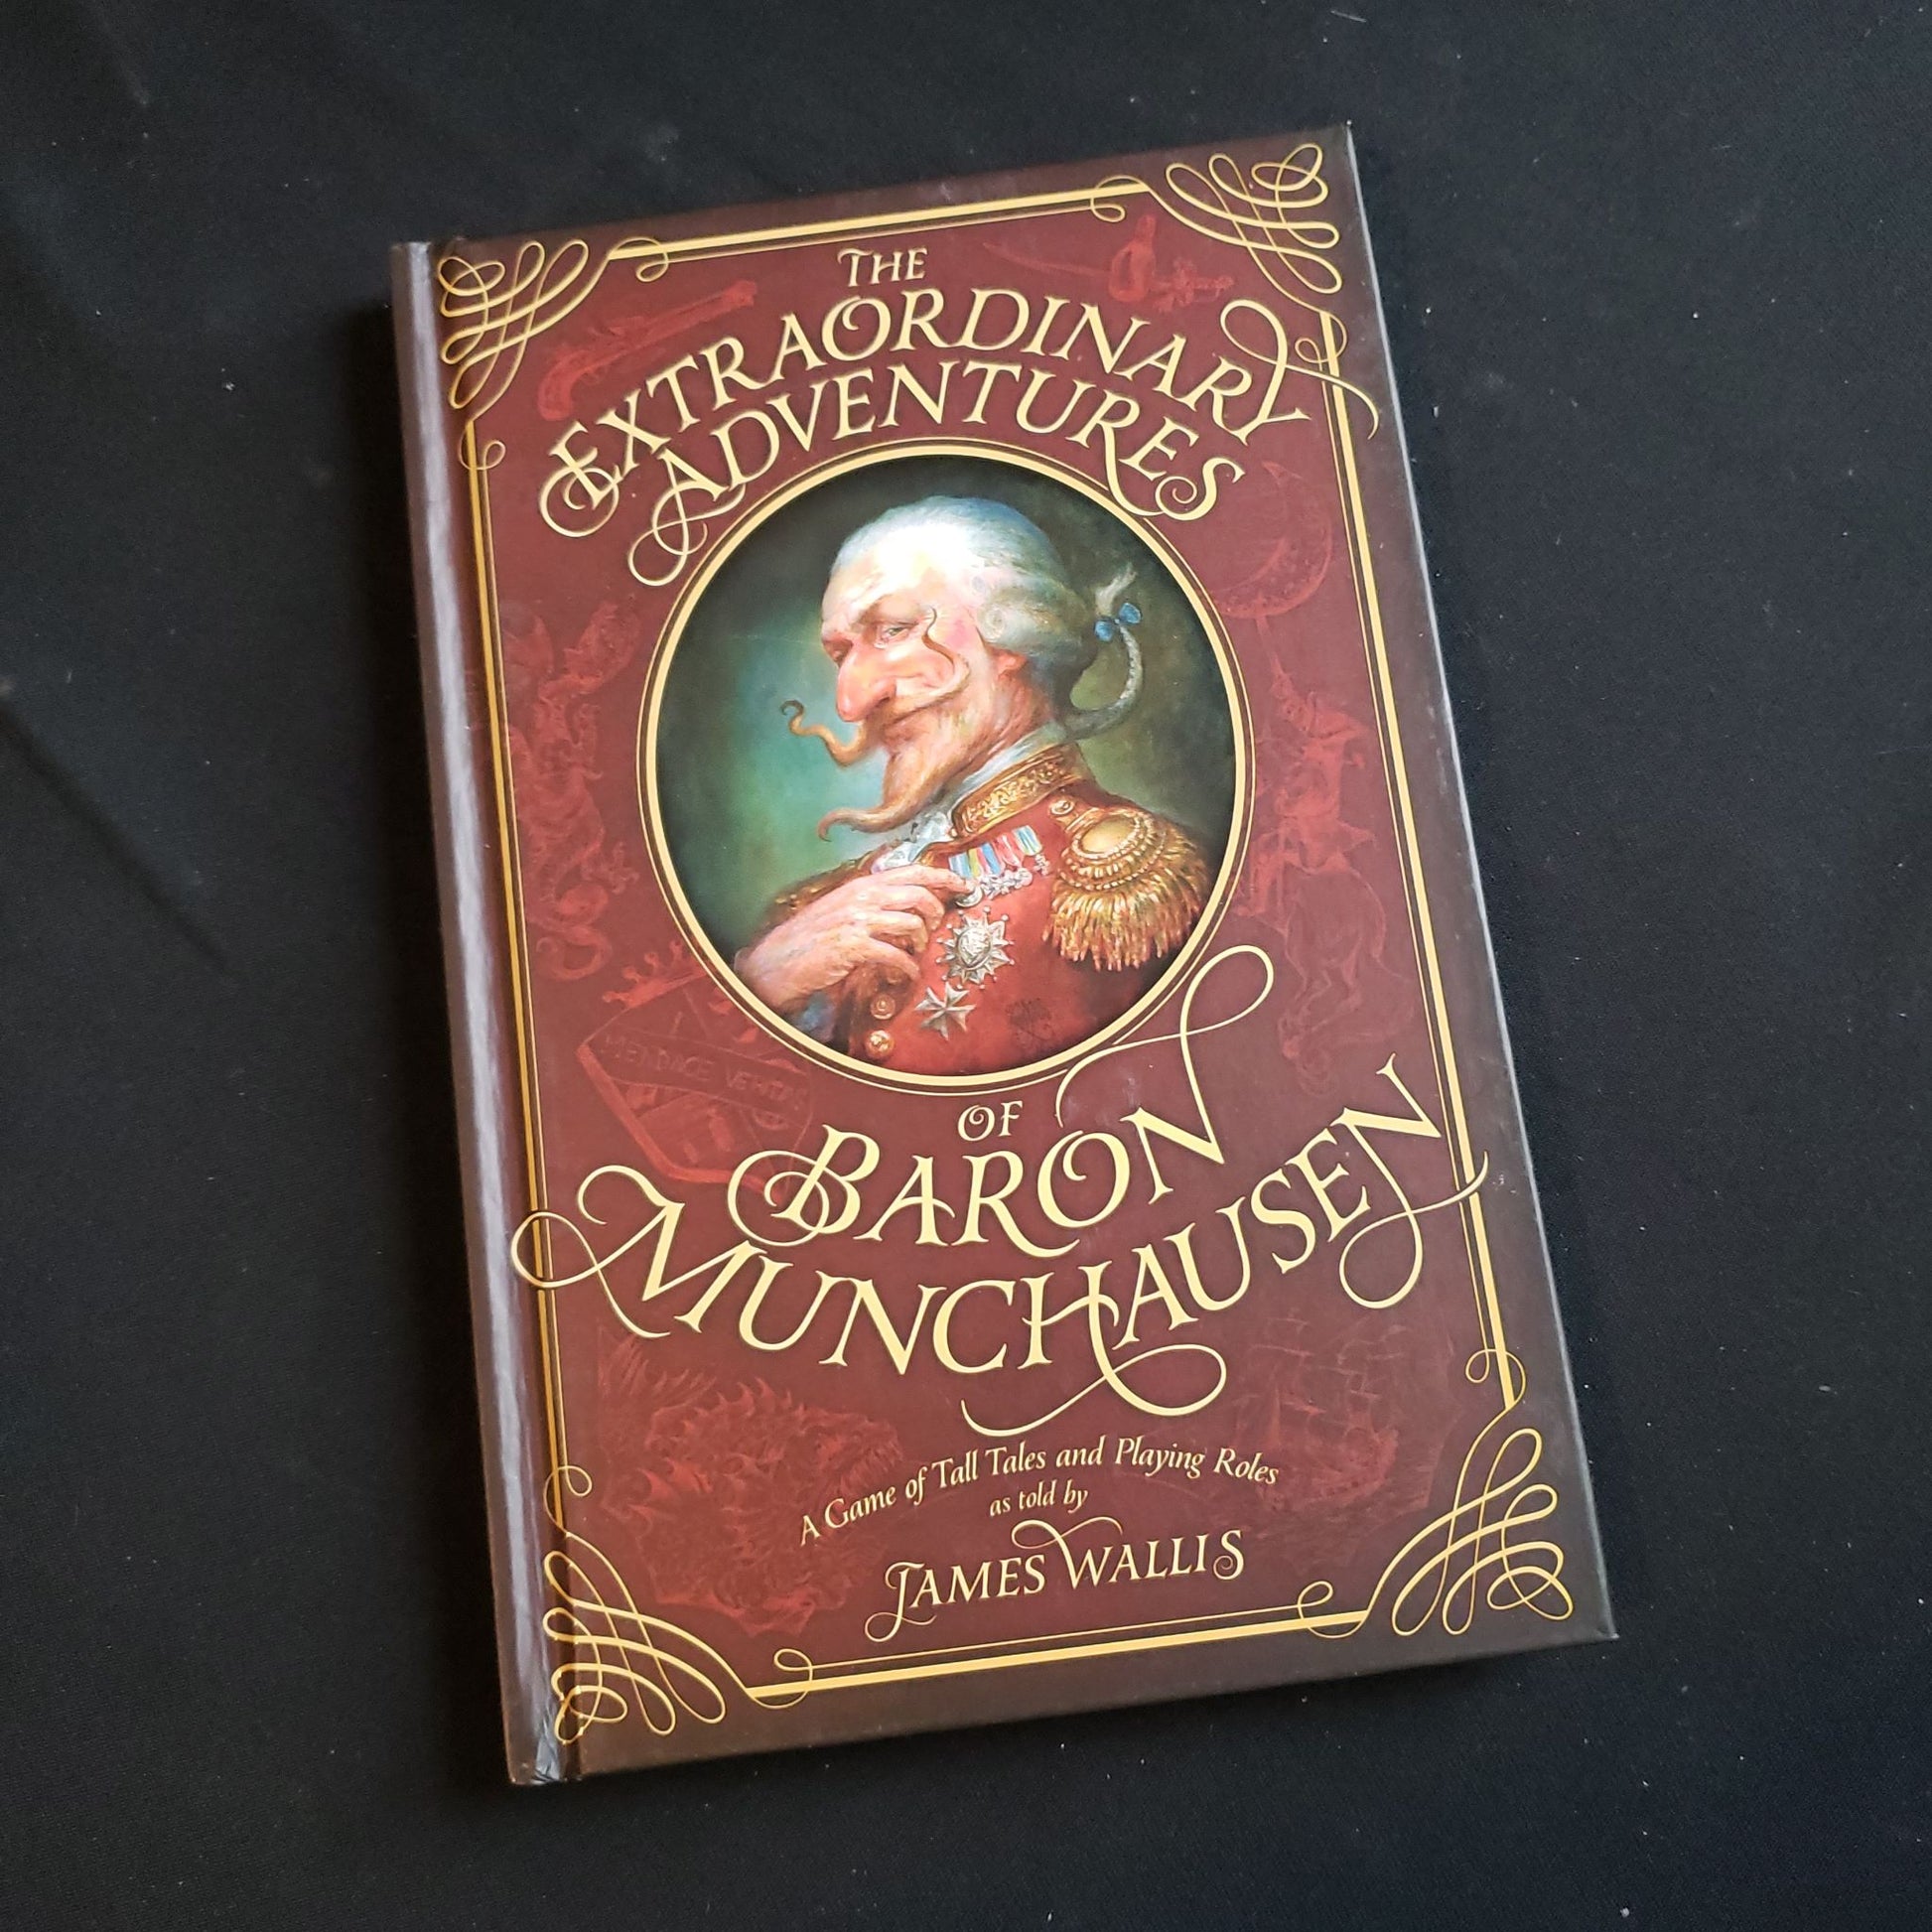 Image shows the front cover of the Extraordinary Adventures of Baron Munchausen roleplaying game book